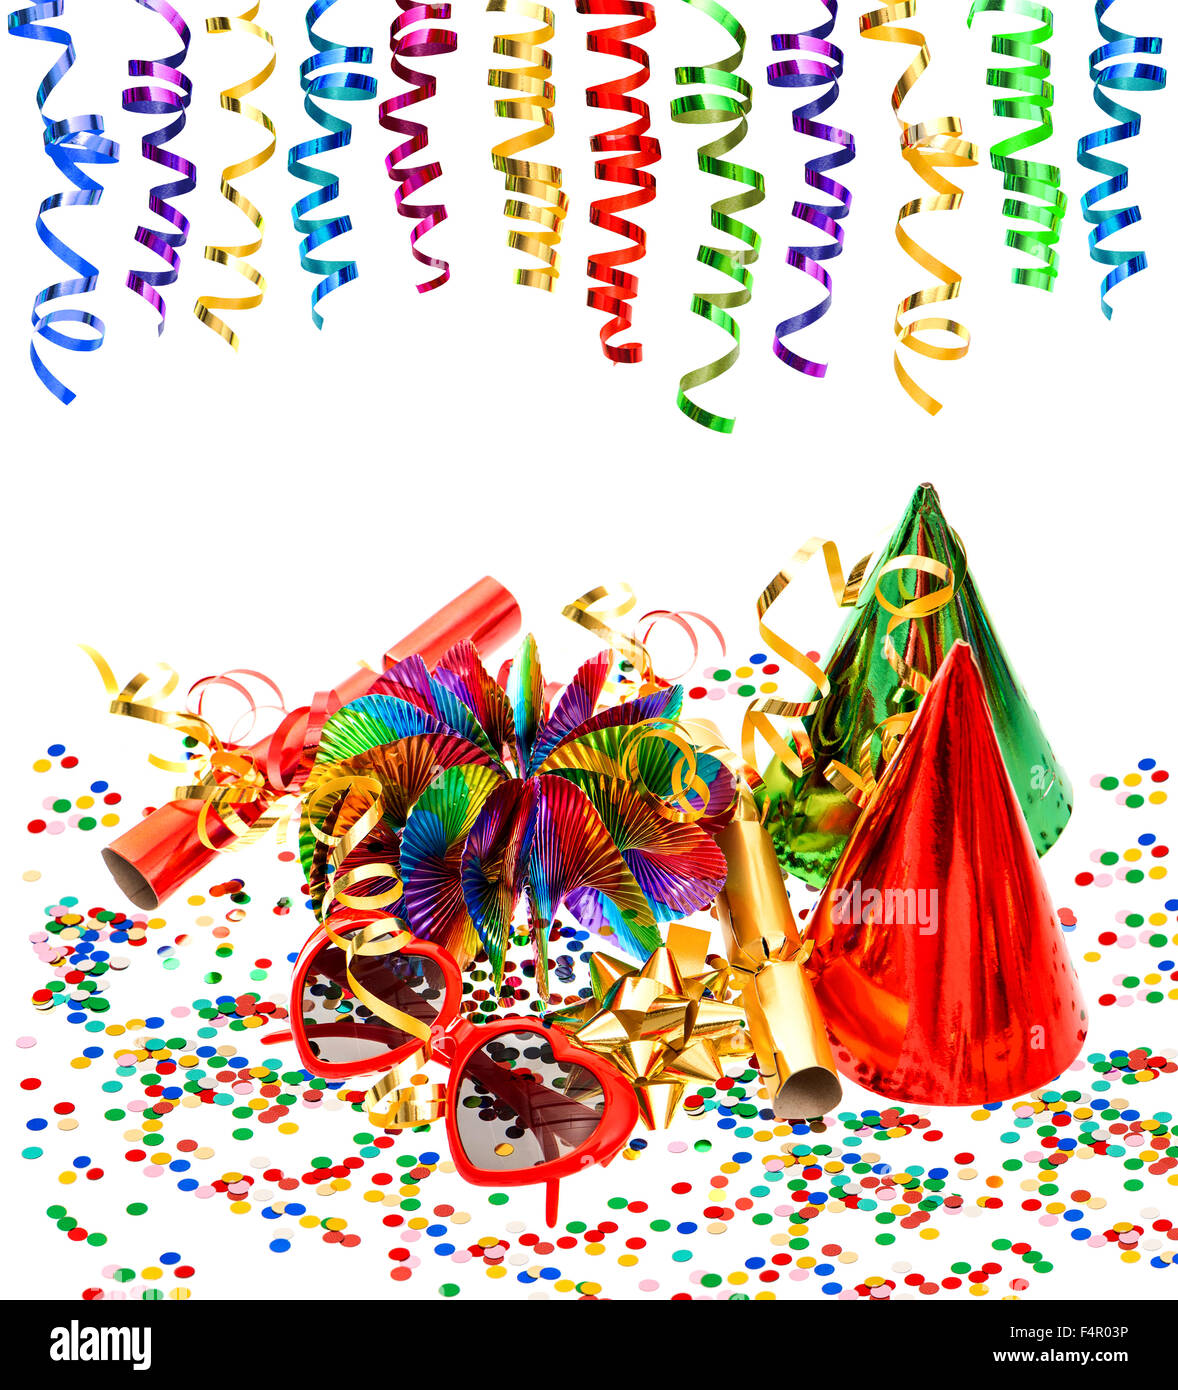 Party decoration with garlands, streamer, confetti, cracker, funny glasses on white background Stock Photo